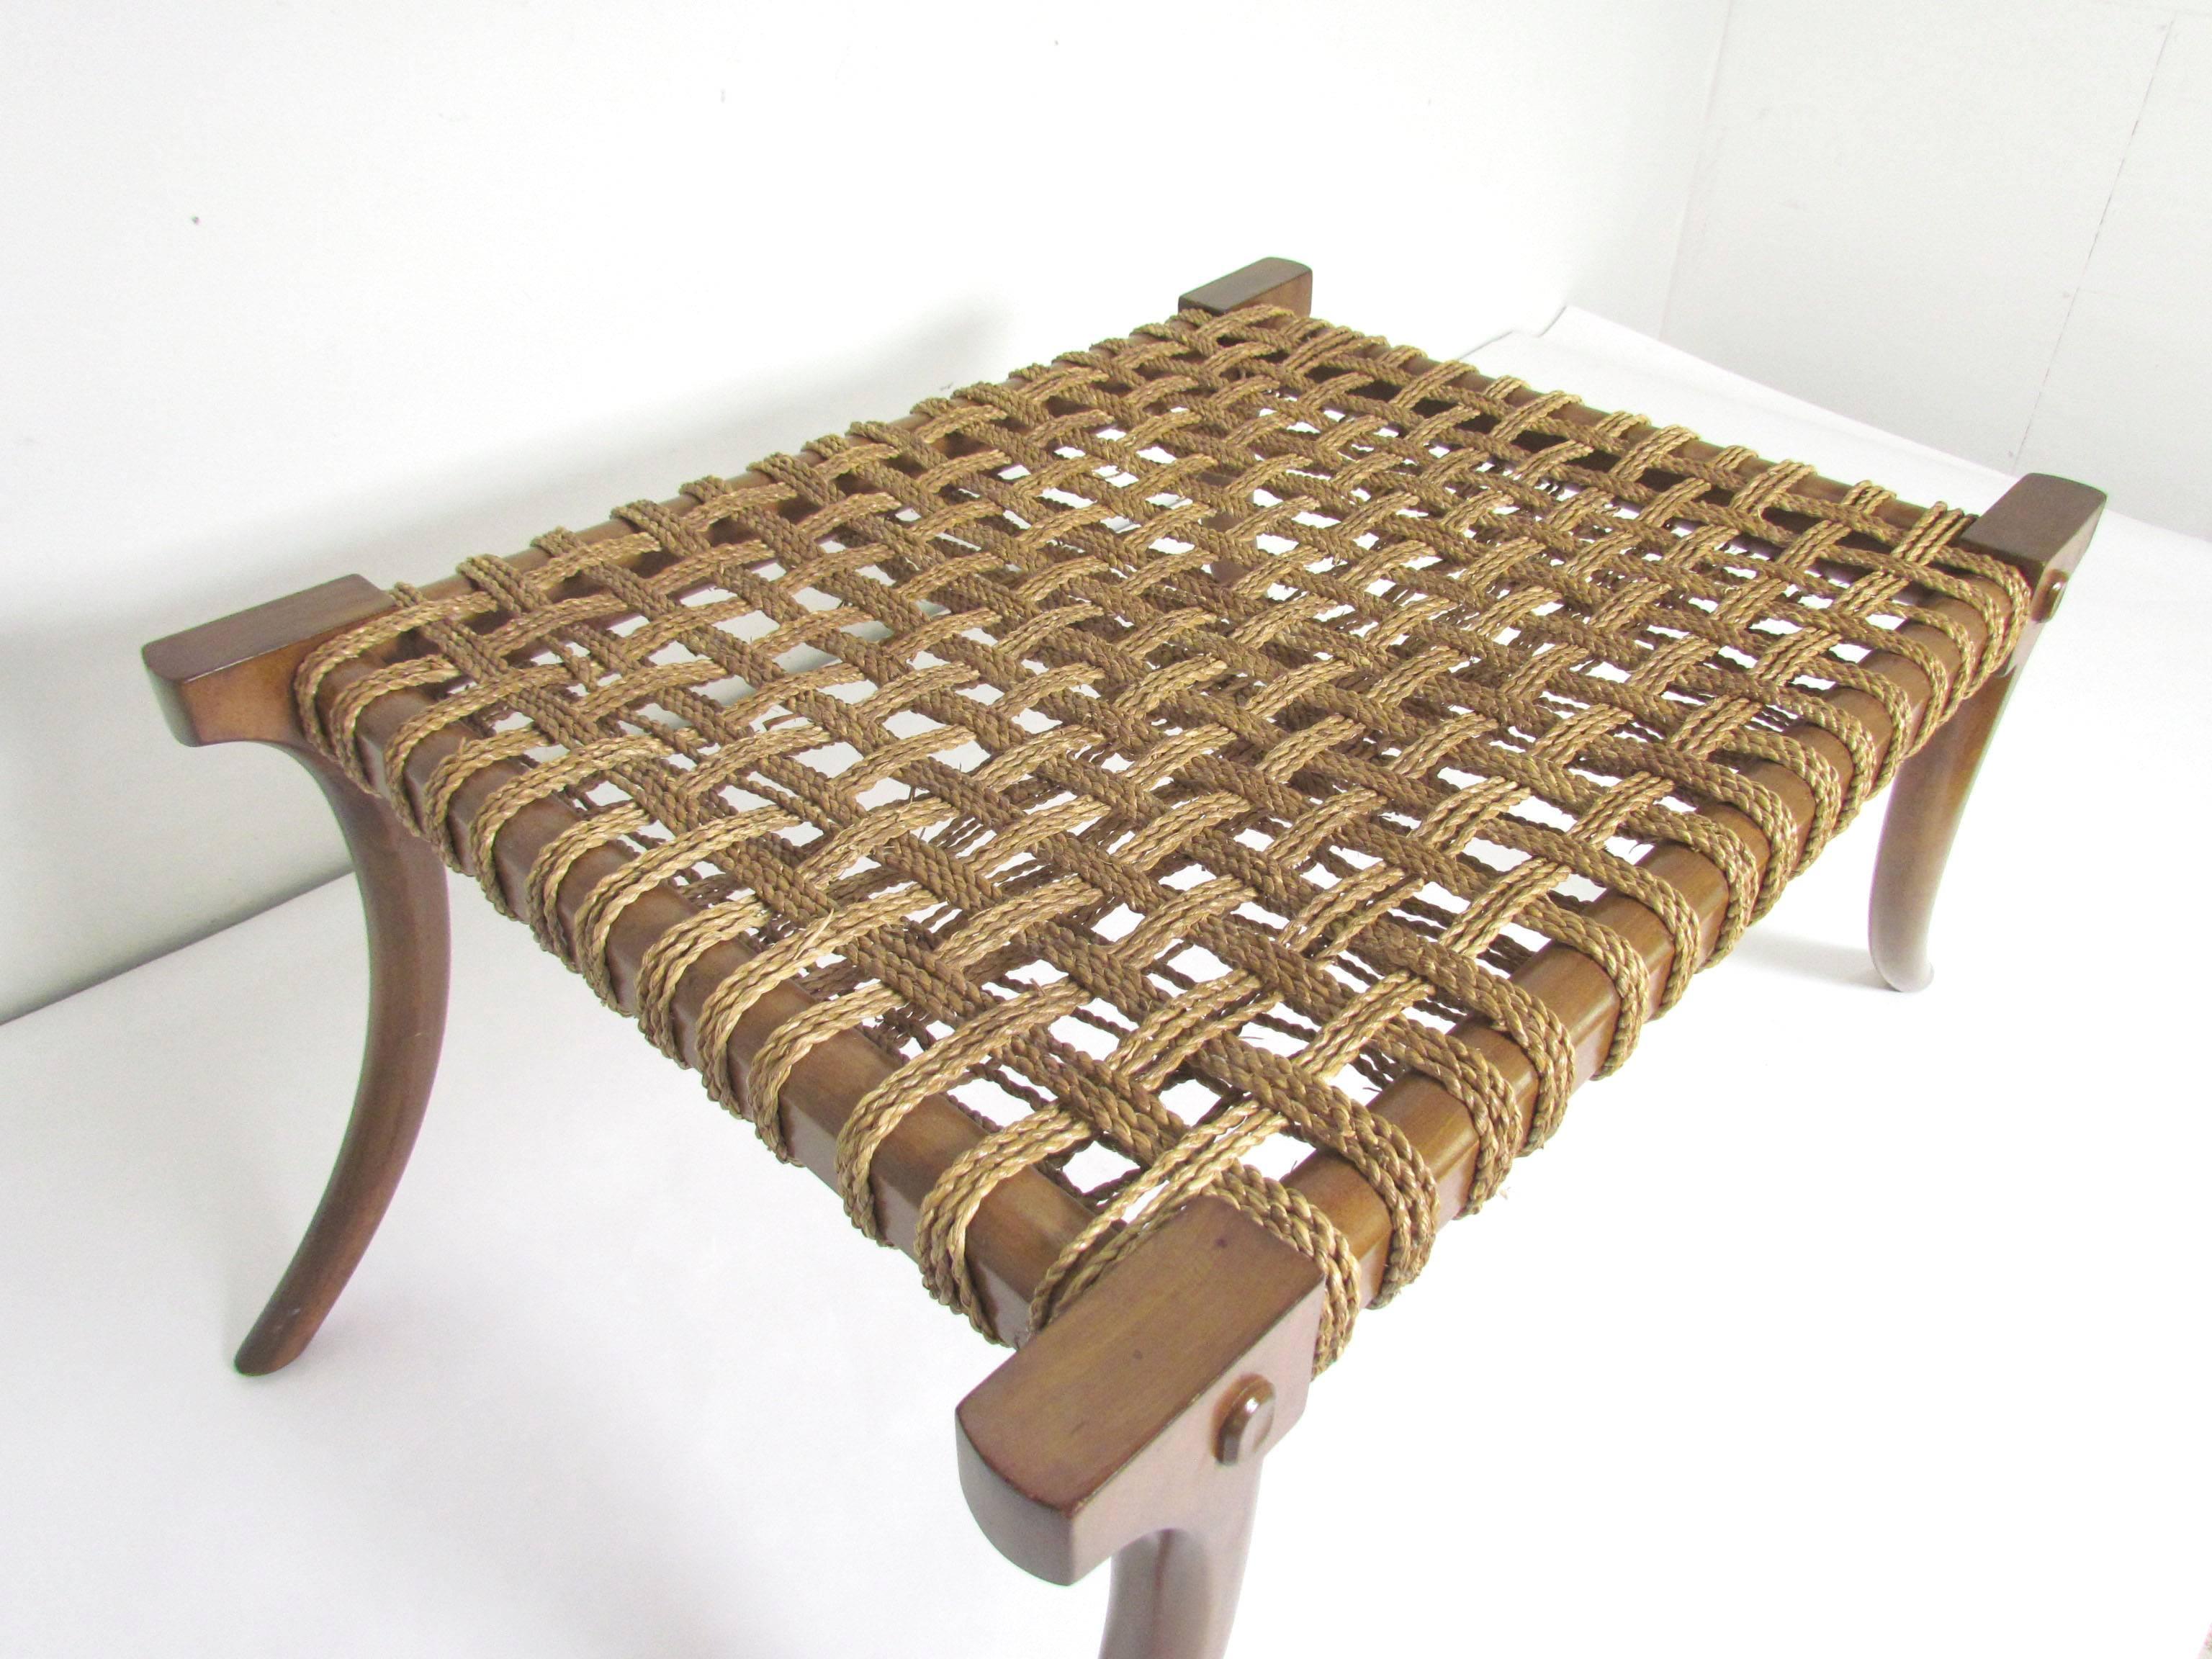 Mid-Century Modern Klismos Bench or Coffee Table with Rope Seat, circa 1960s